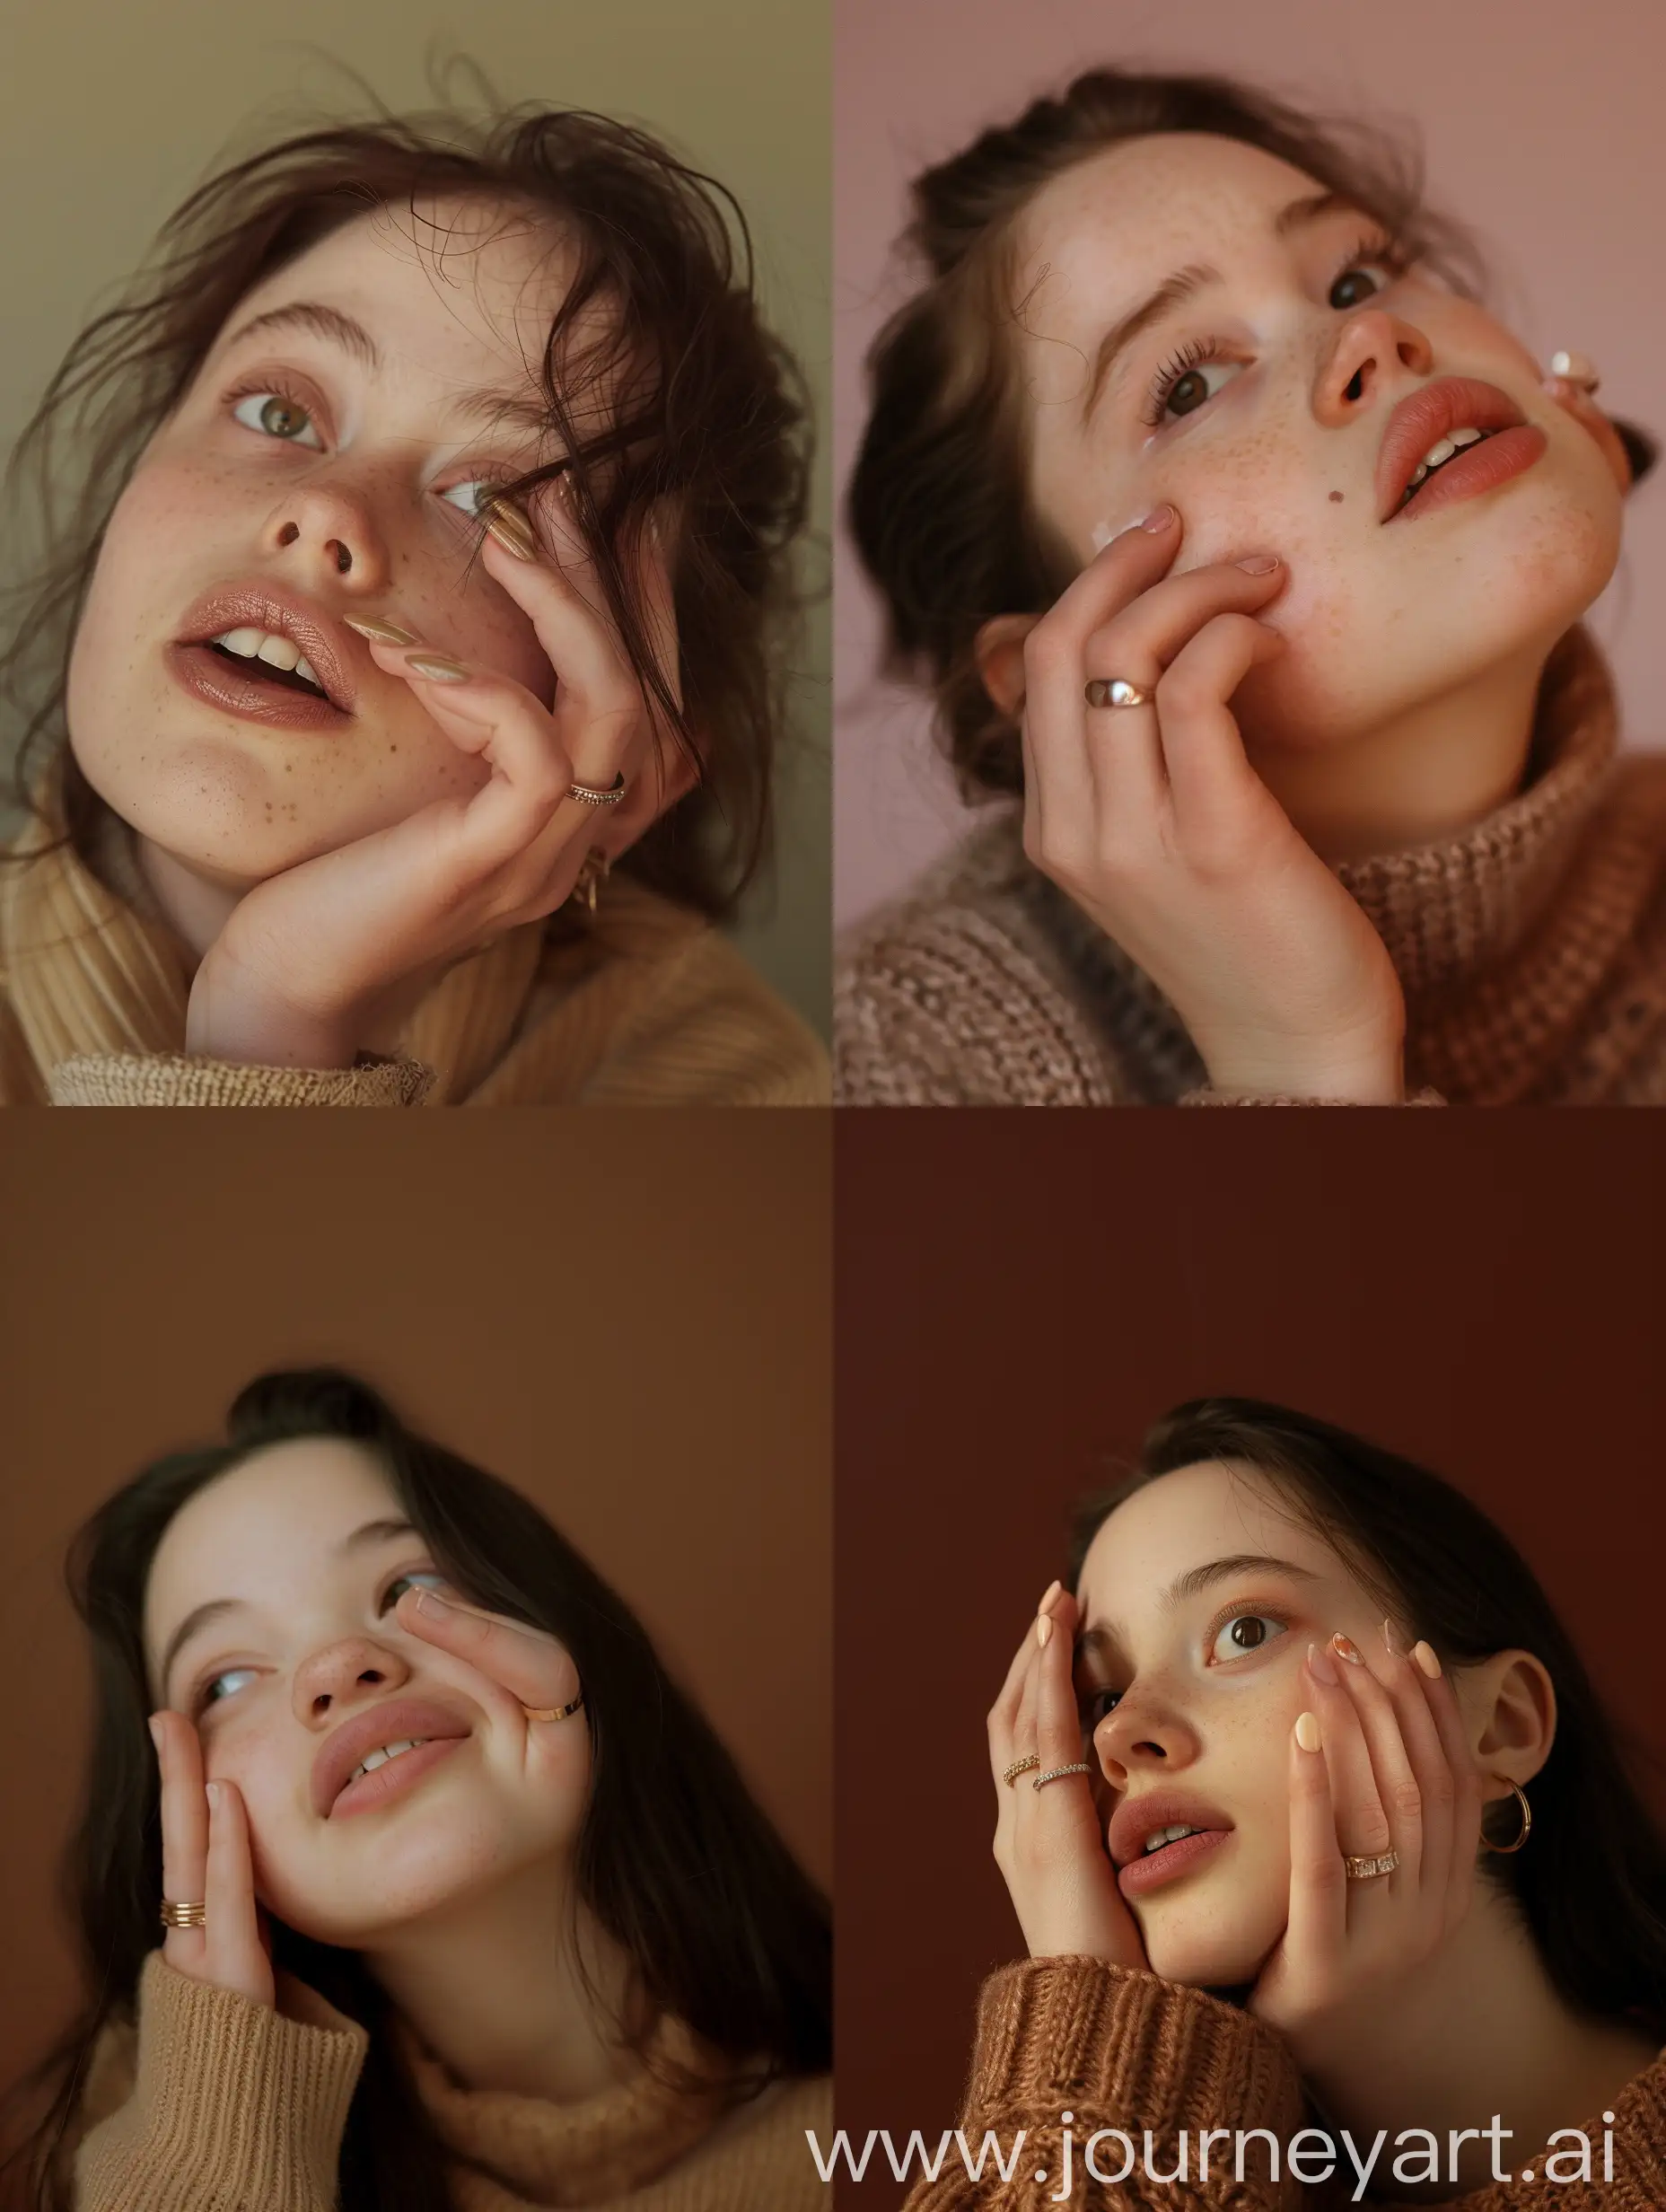 Aesthetic Instagram selfie of a teenage super model girl with down syndrome, warm brown tones, looking up, hand on cheek, manicured hand, rings